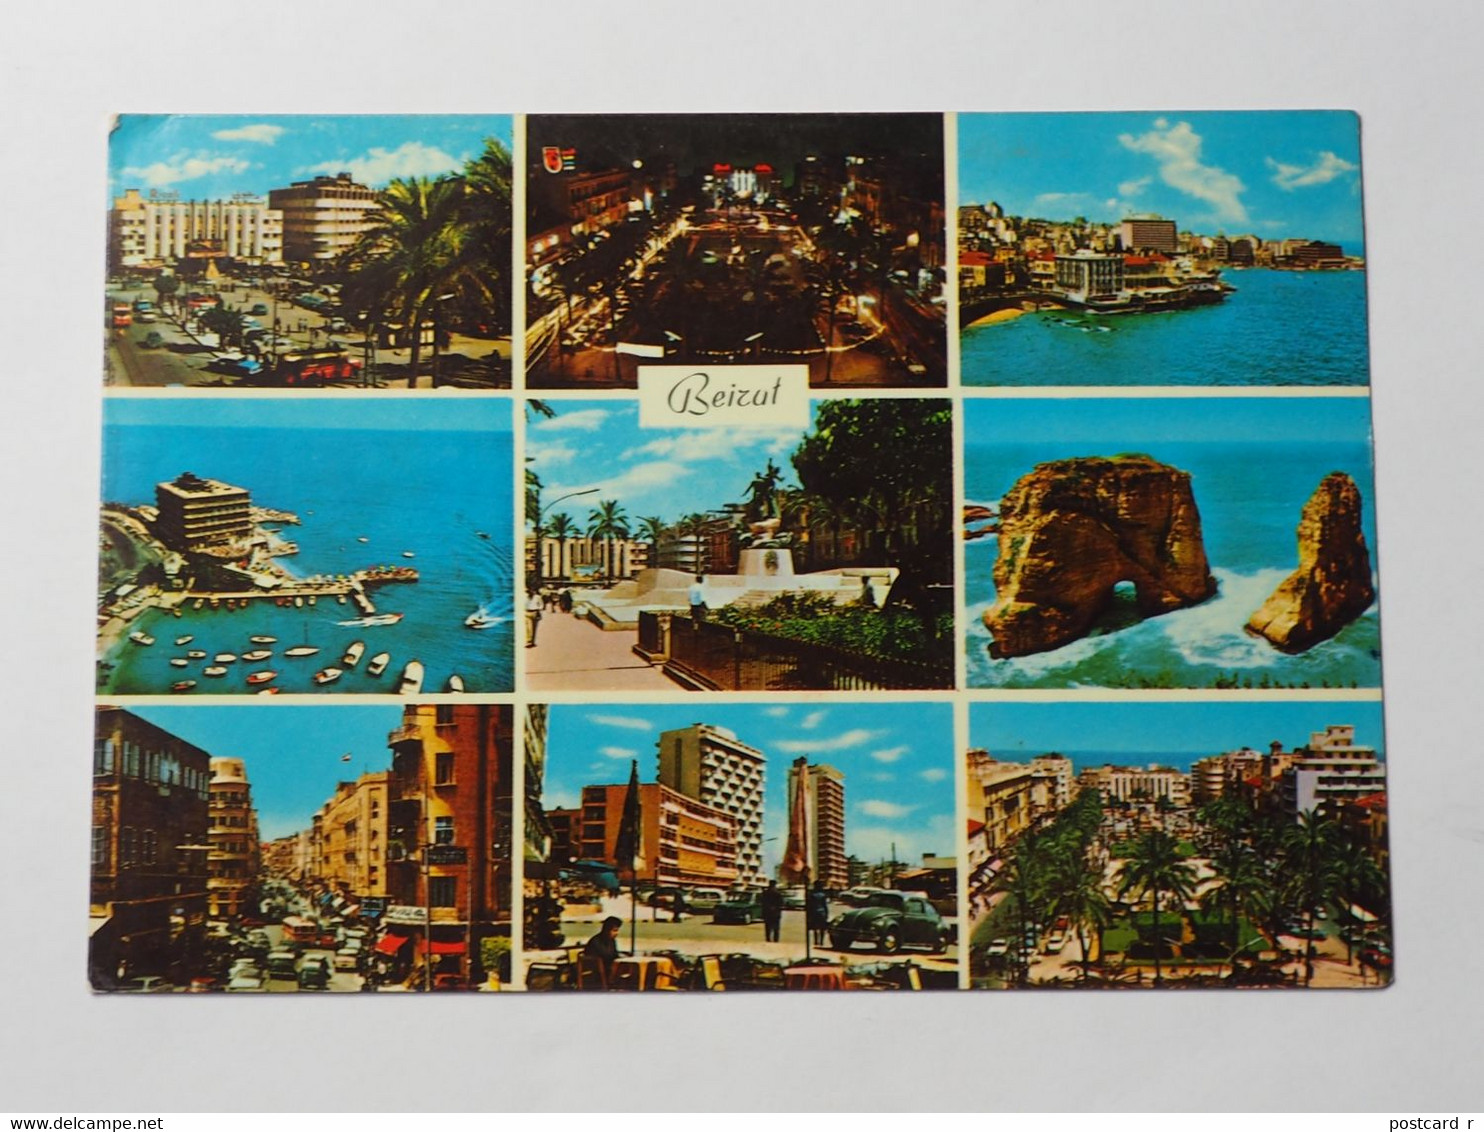 Lebanon Greetings From Beirut Multi View     A 222 - Libanon